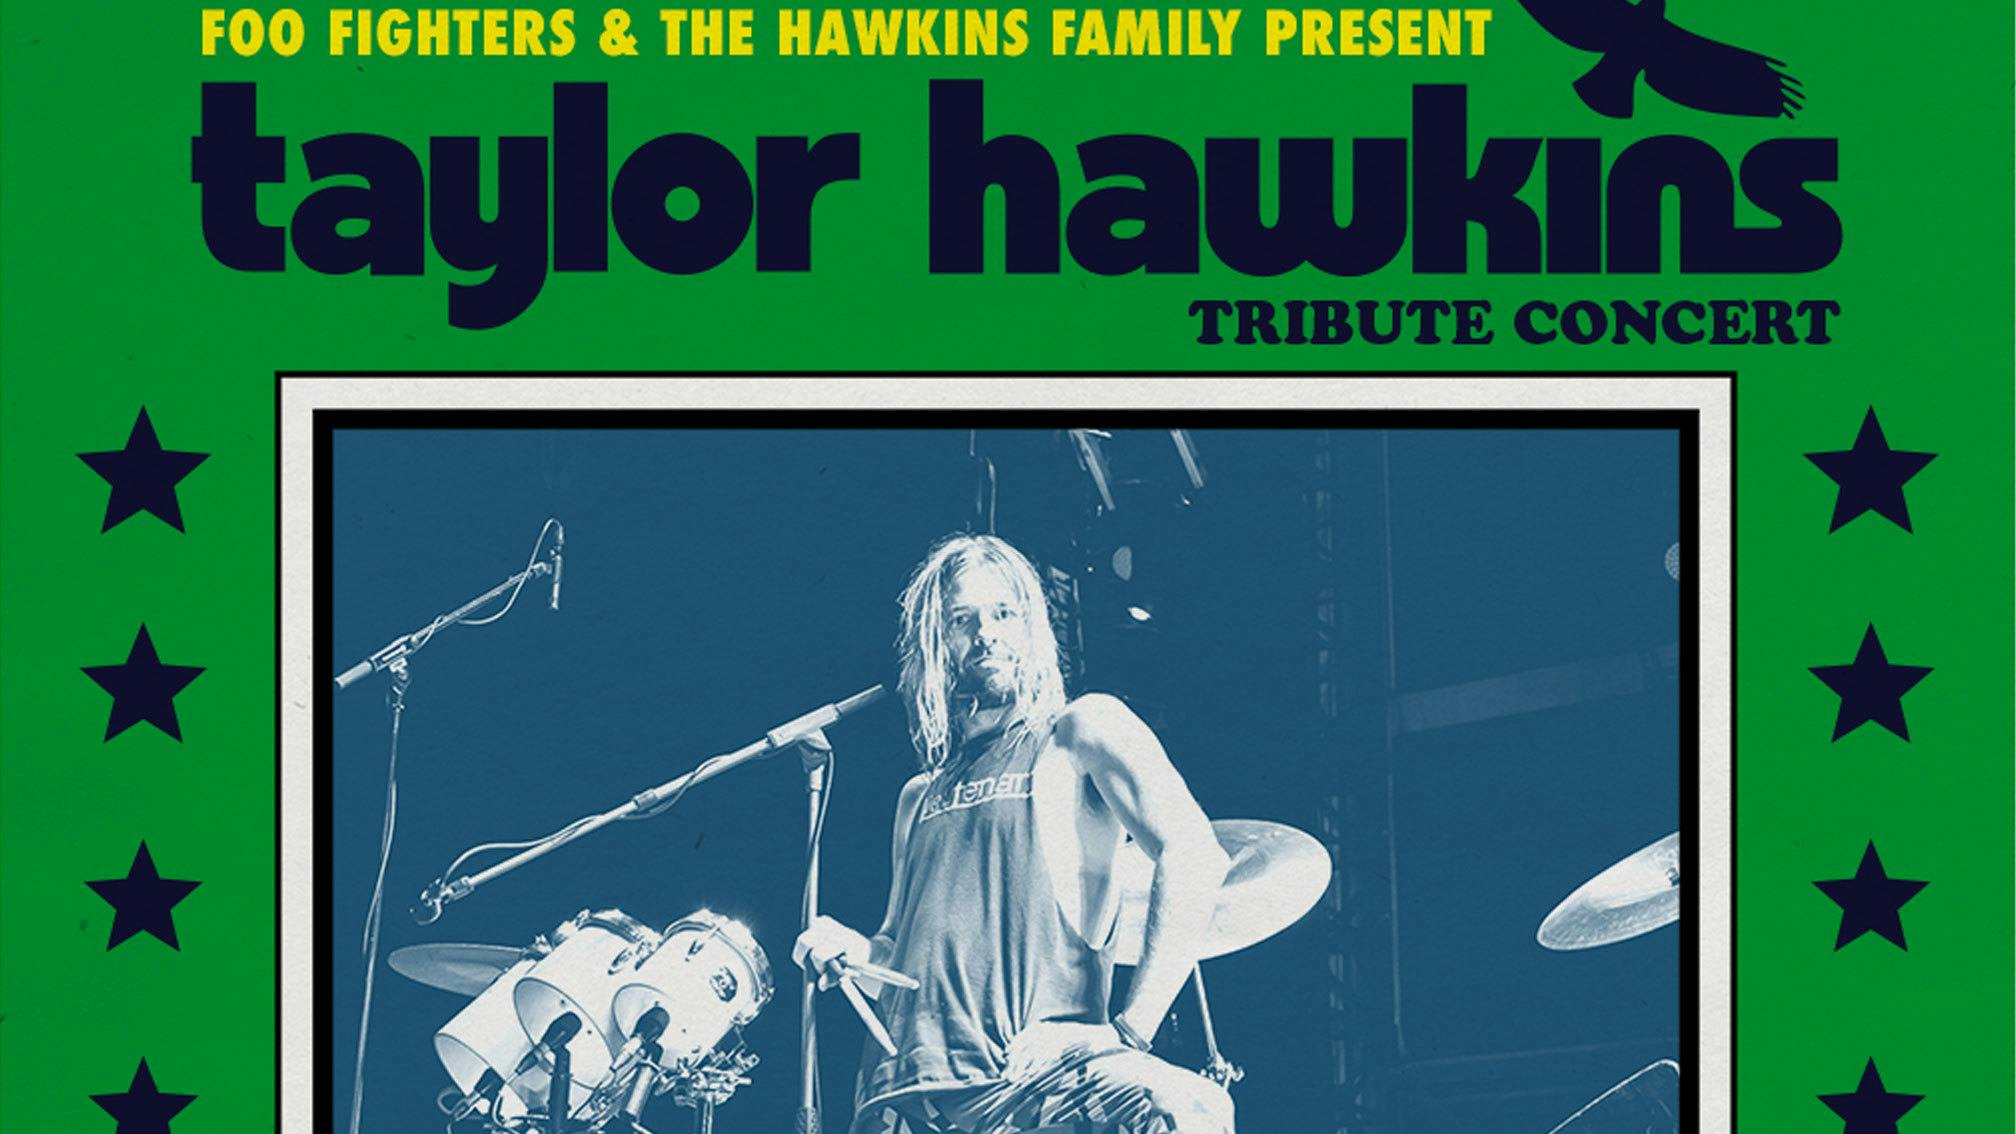 Even more guests announced for both Taylor Hawkins tribute shows